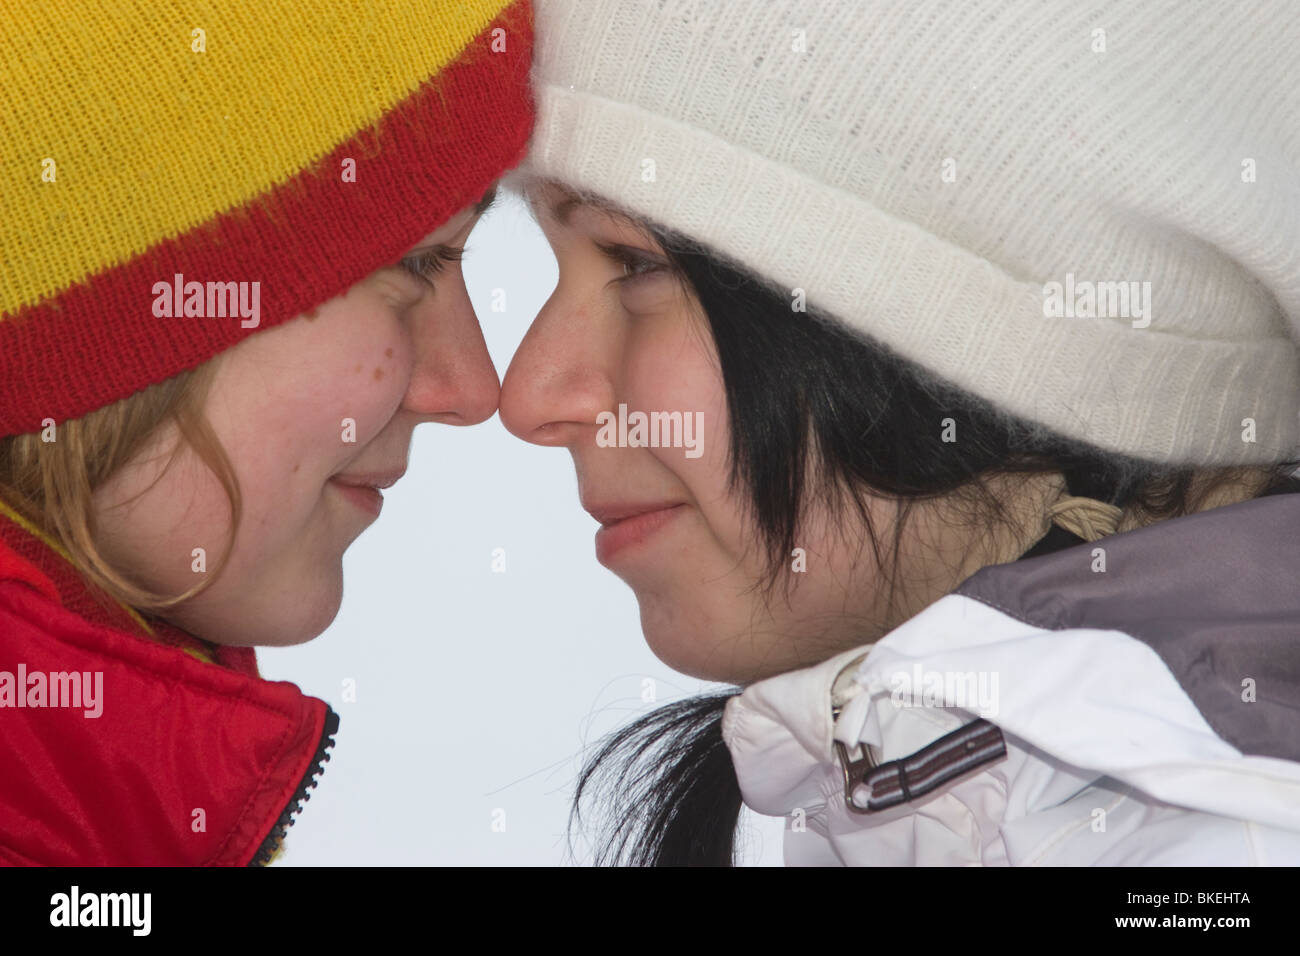 Two Cute girls Together sharing a secret winter Sweden Stock Photo